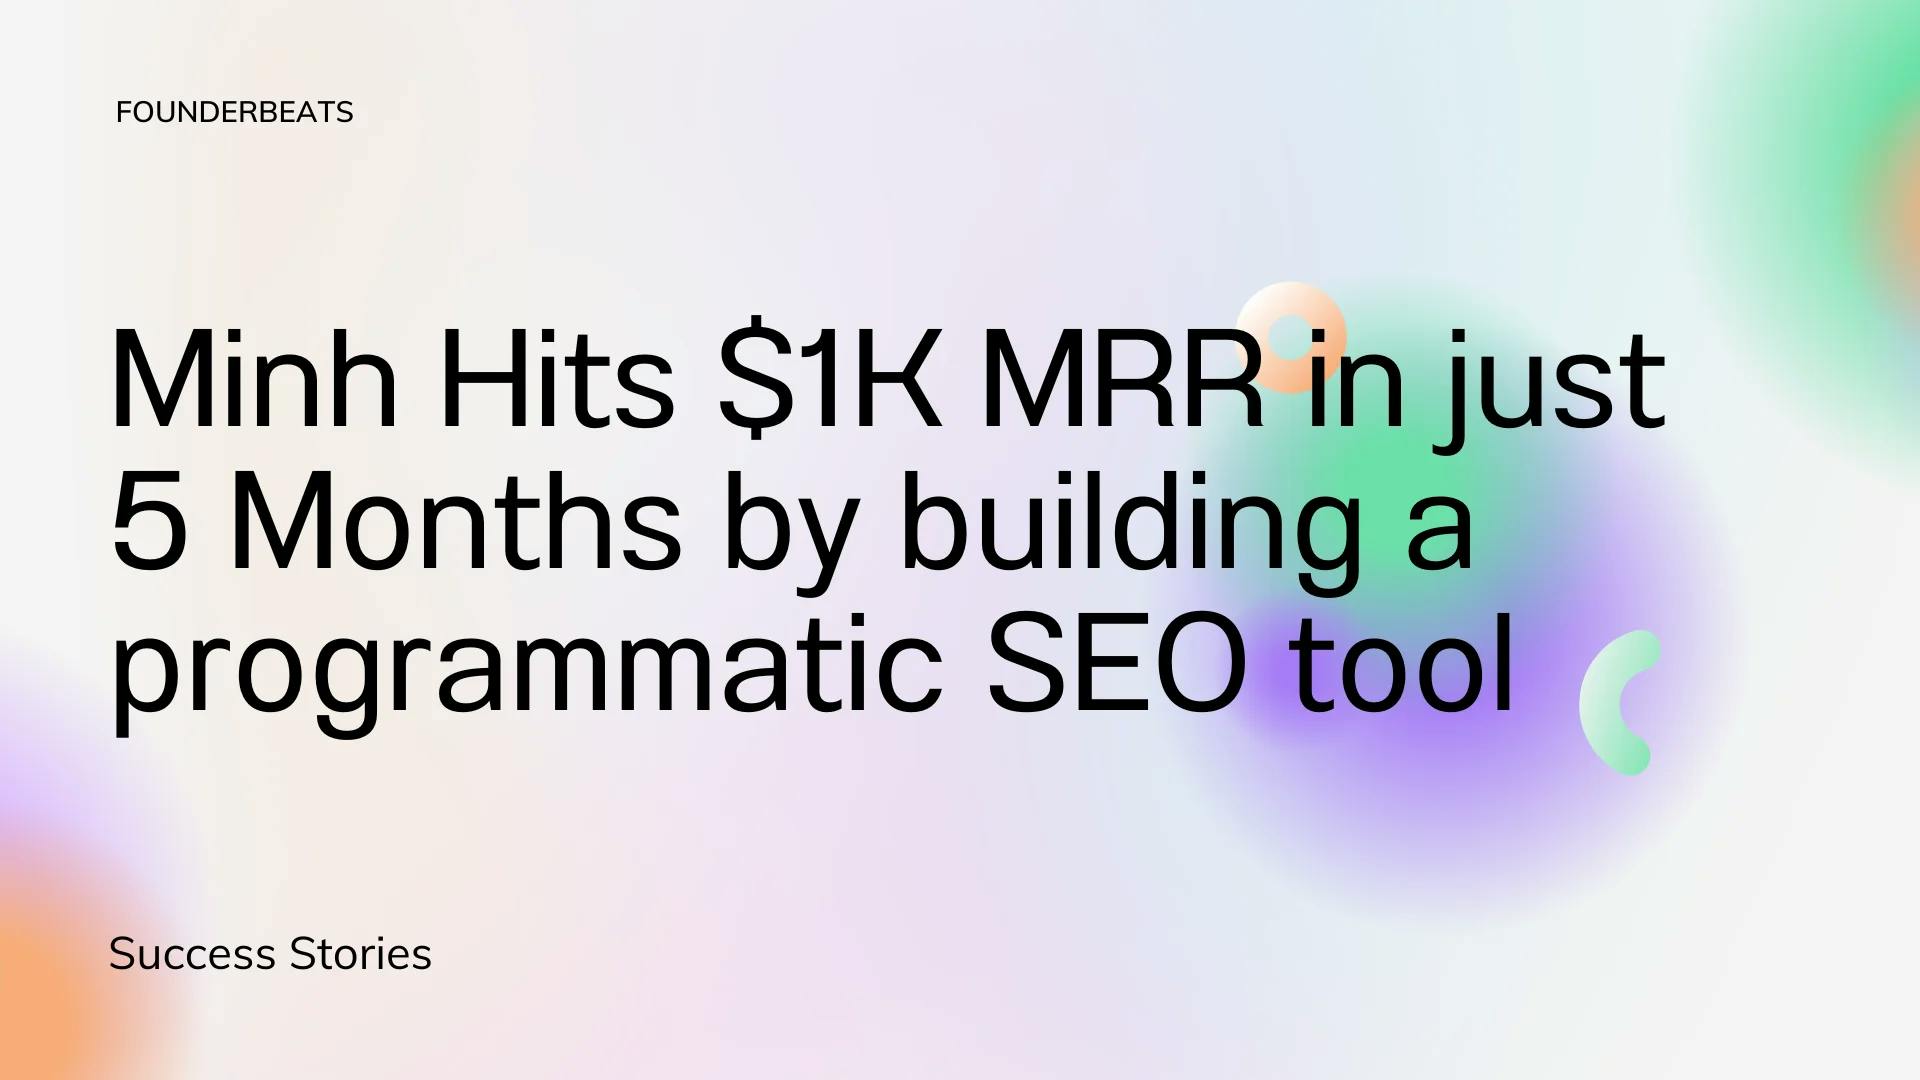 Minh Hits $1K MRR in just 5 Months by building a no-code tool using no-code